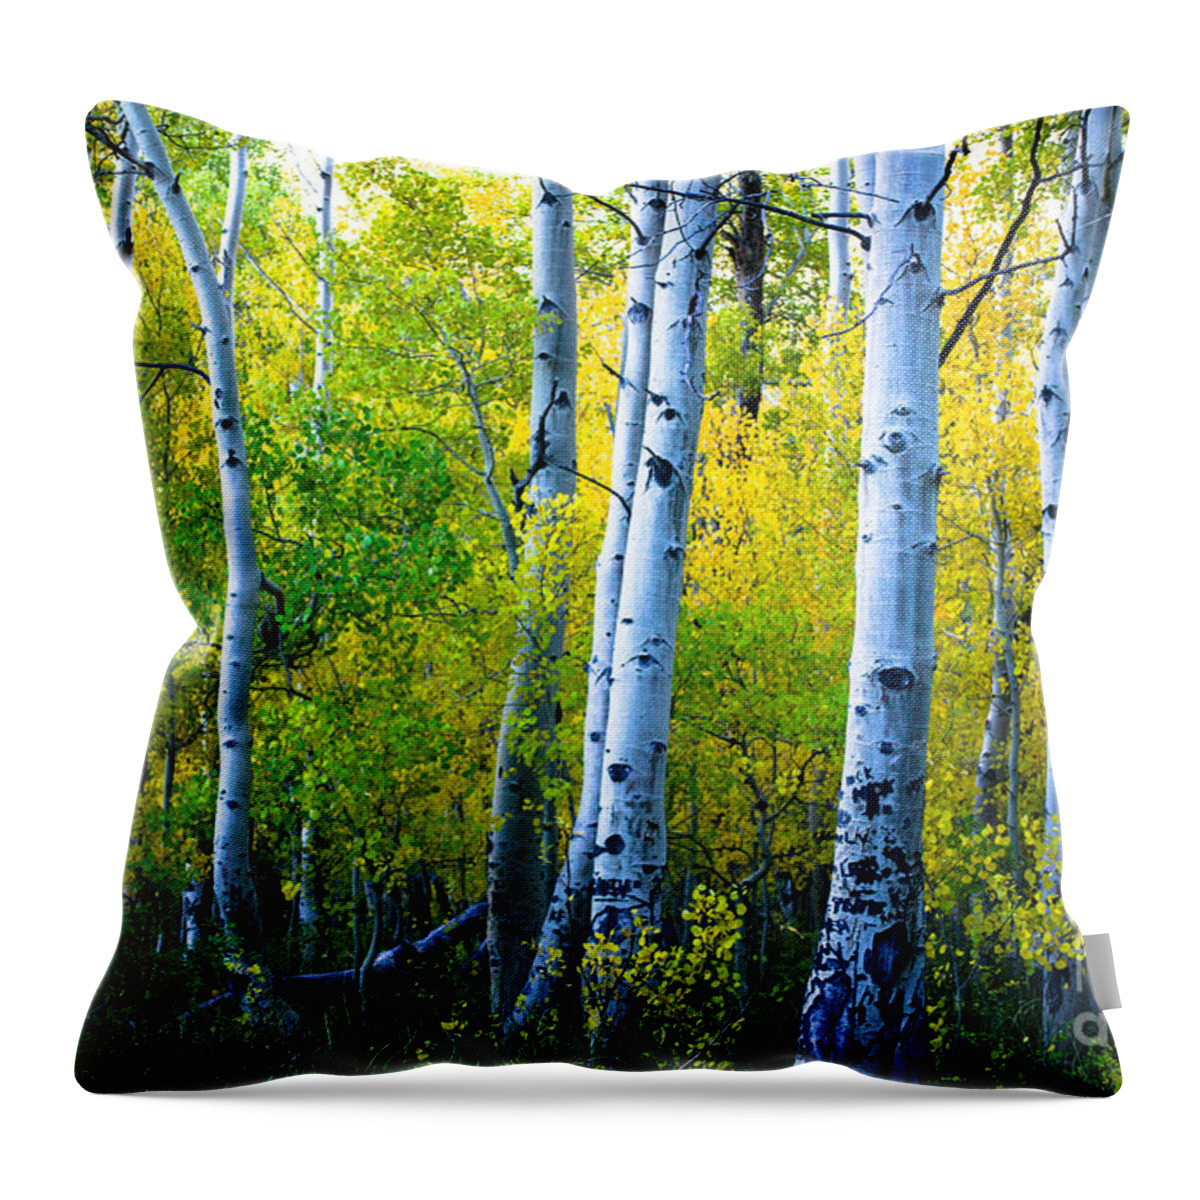 Convict Lake Throw Pillow featuring the photograph Convict Lake Aspen Forest by Misty Tienken